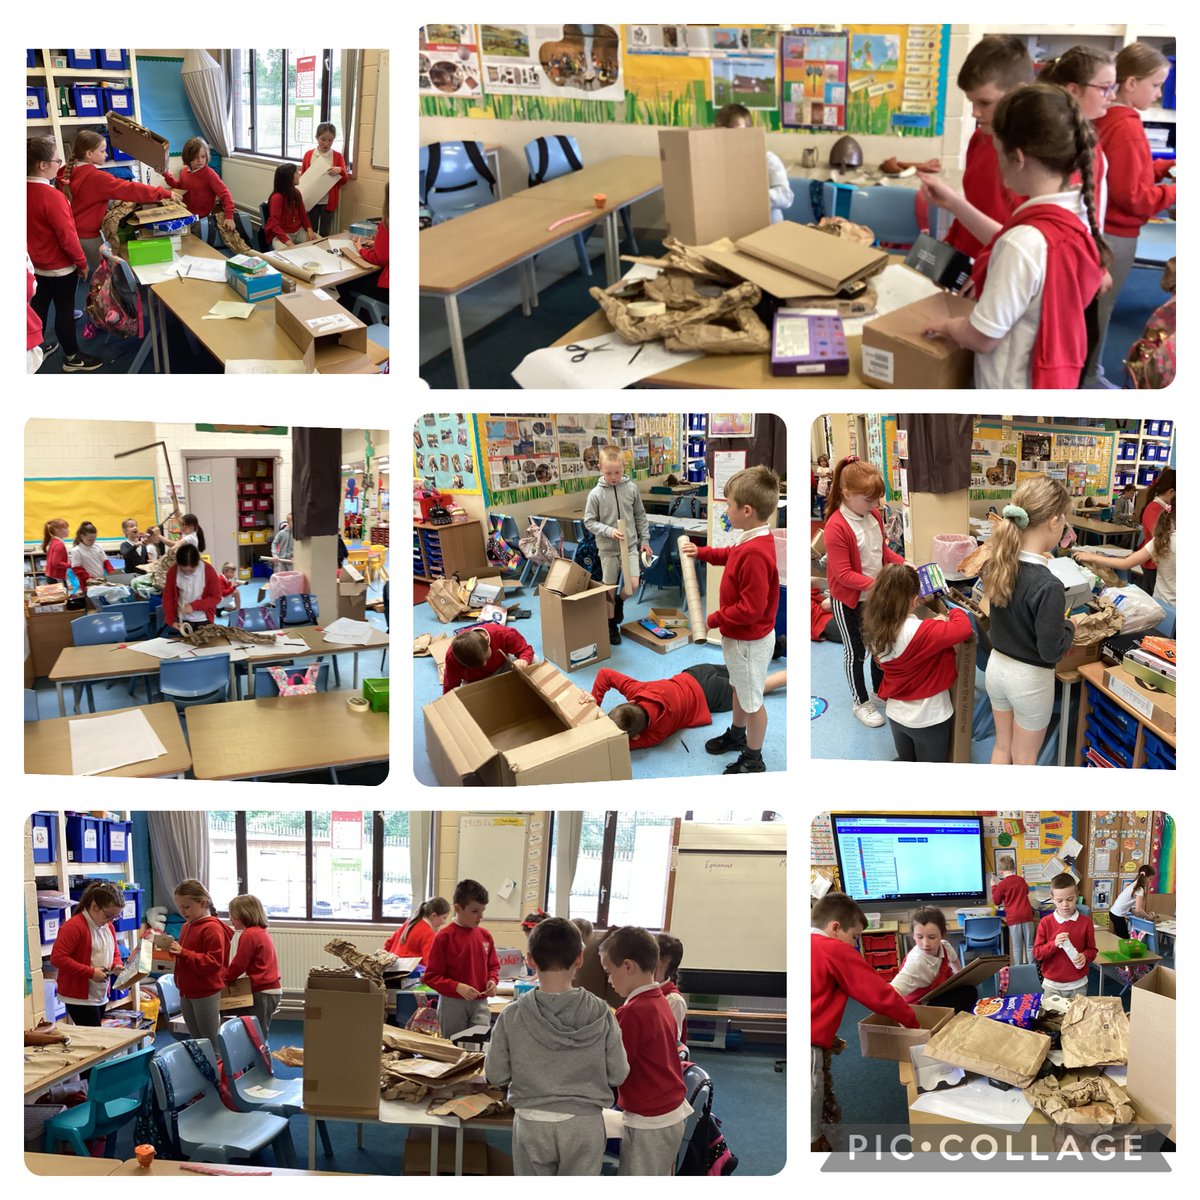 Today P4 are starting their Craft and Design projects. They have chosen to work in groups to create a  Viking longhouse or longboat. #article12 #article31